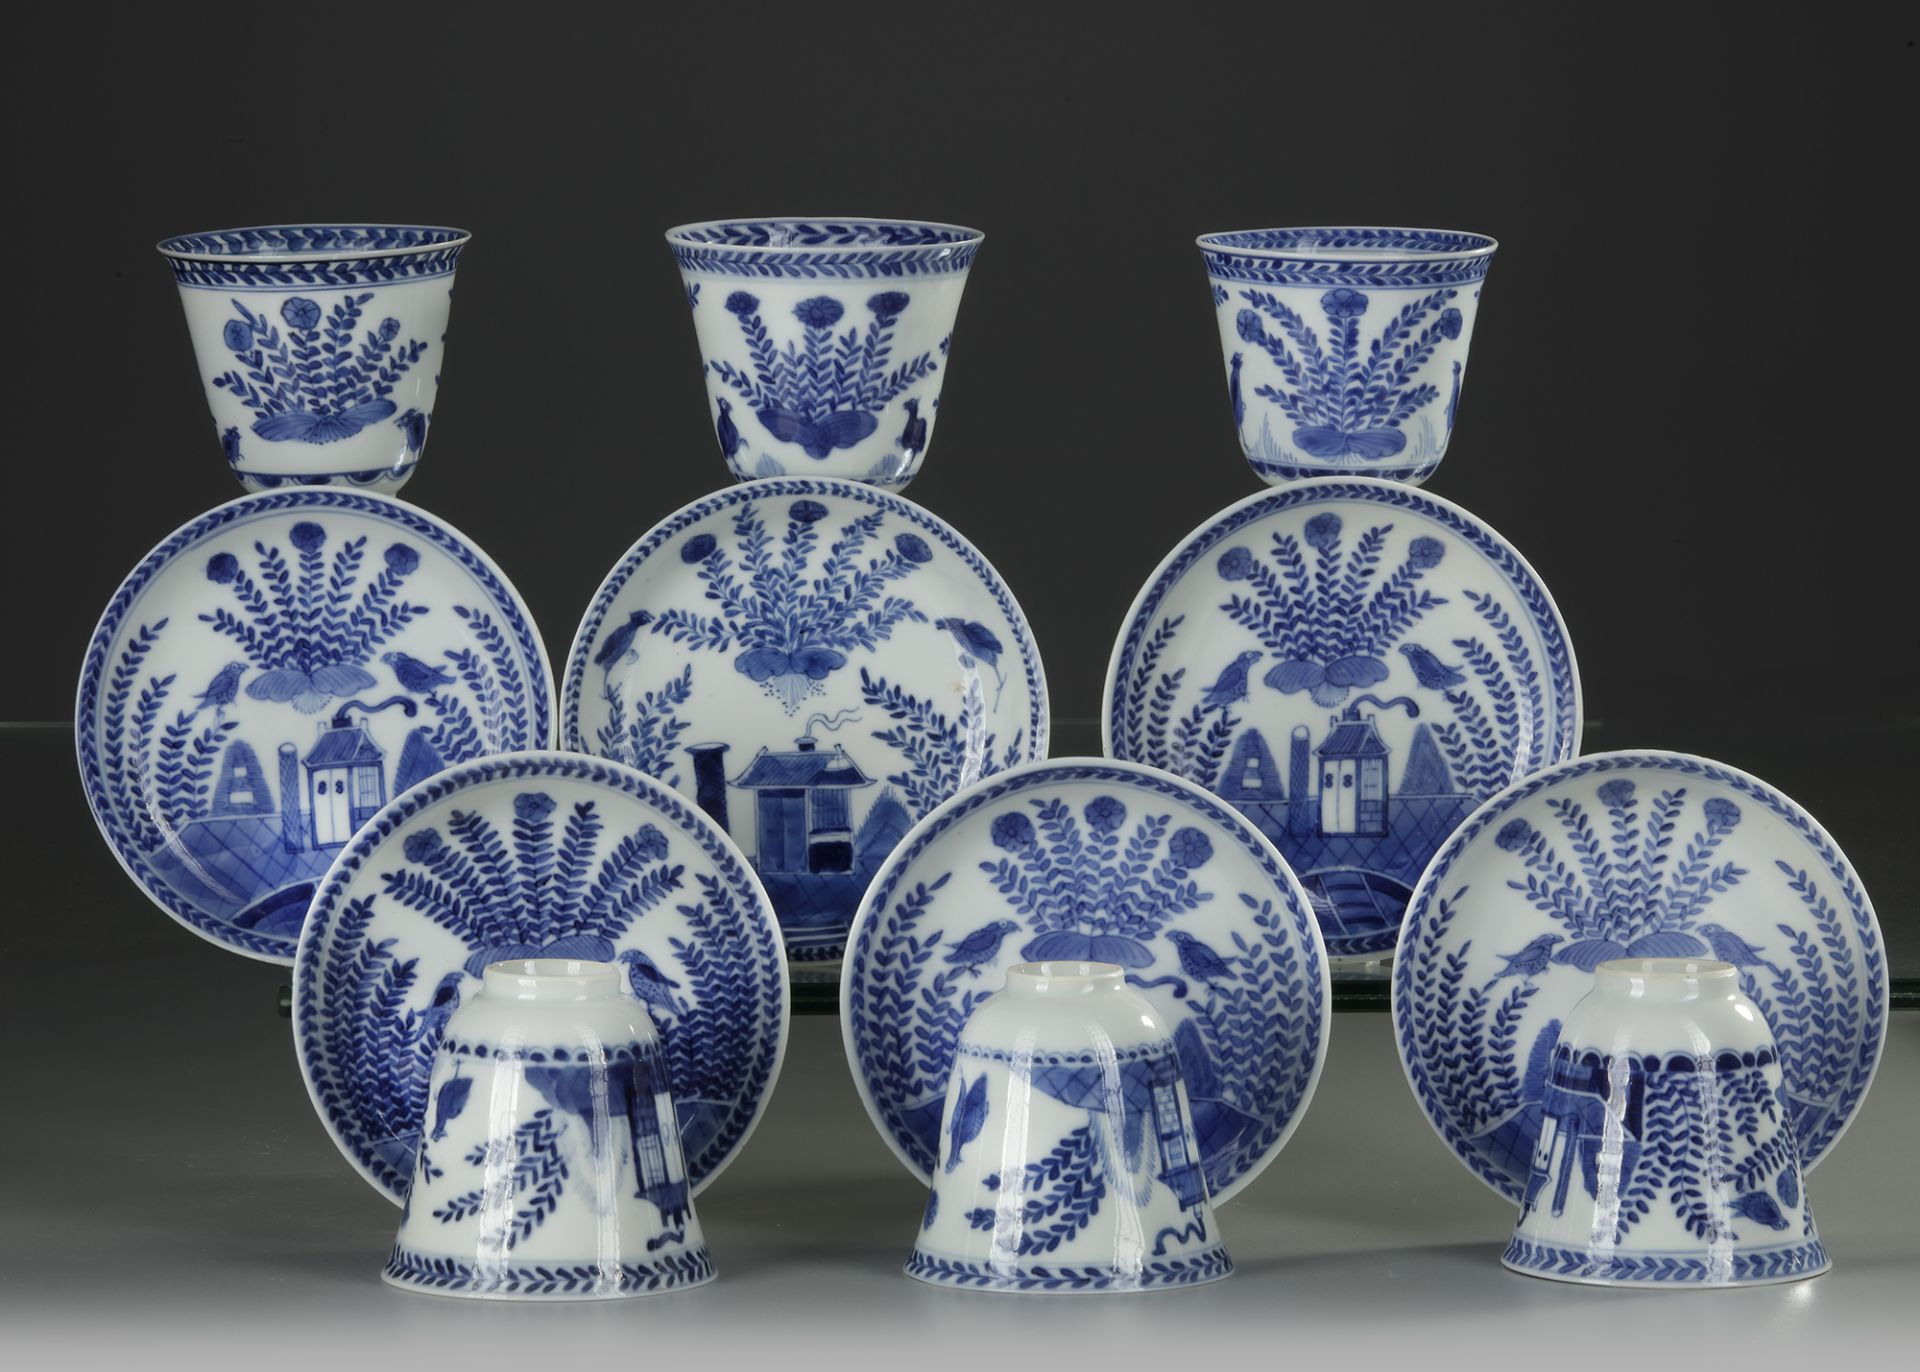 SIX CHINESE BLUE AND WHITE 'CUCKOO IN THE HOUSE' CUPS AND SAUCERS, 18TH CENTURY - Bild 2 aus 3